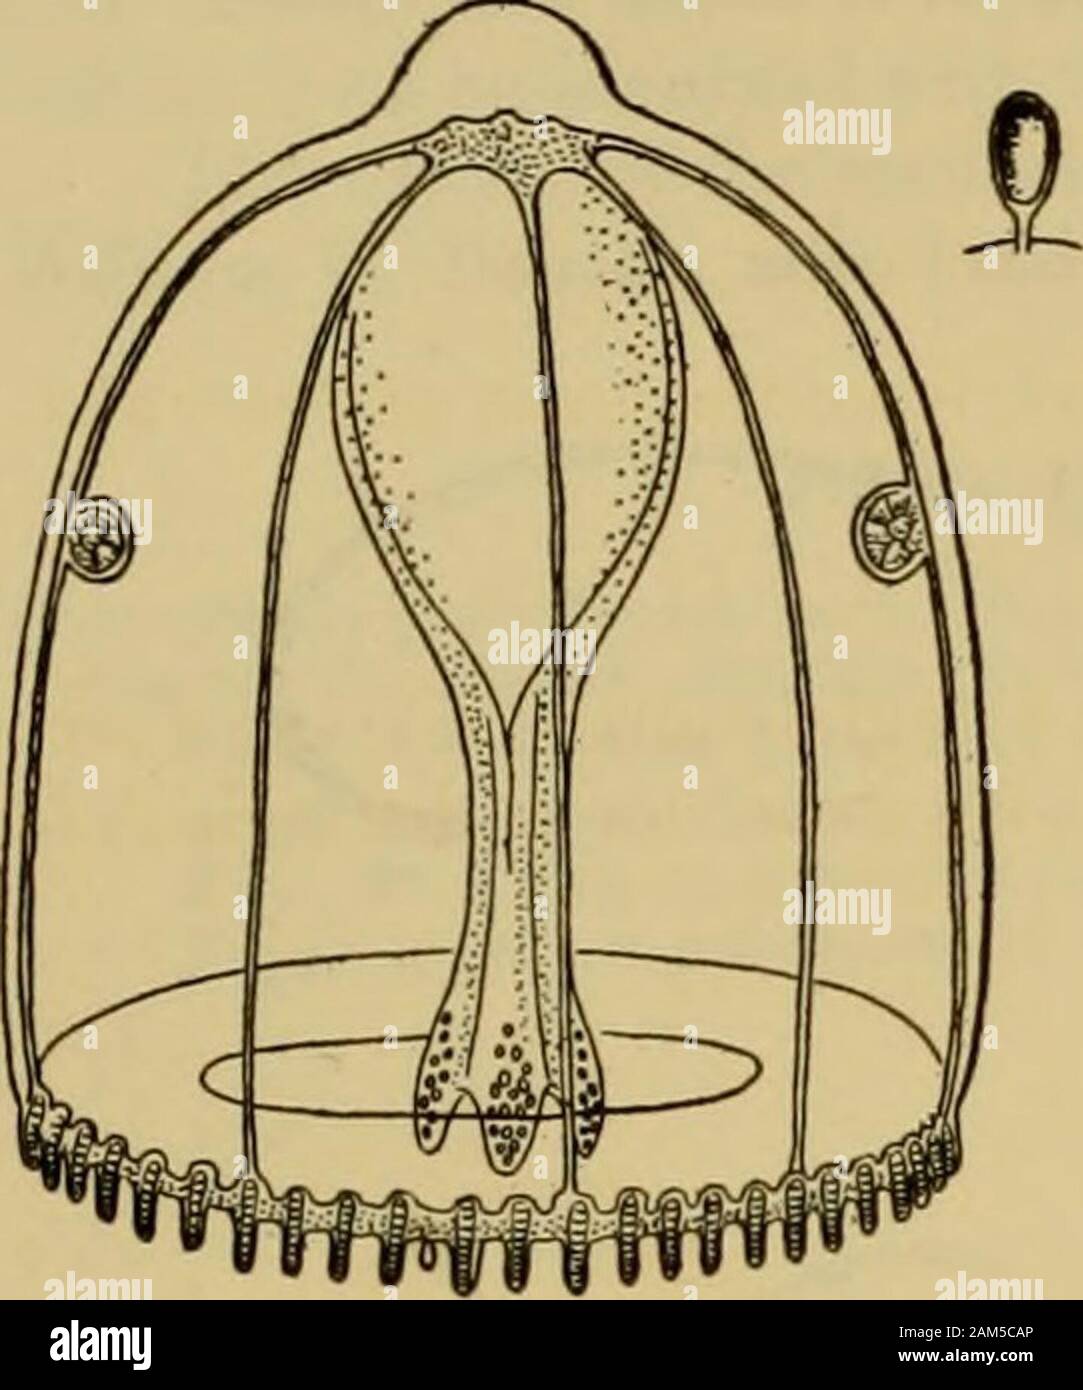 Medusae of the world . of these forms is given in the following table. Haeckels so-called lantern-shape of the bell is due to contraction, yet he attempts to dis-tinguish two species upon the presence or absence ot this character. On December 11, 1907, I found an immature Persa in the Bay of Naples, Italy. The bellwas 1 mm. high and oval, with a solid dome-like apex. There were 46 tentacles all broken offshort. The 16 radial and interradial tentacles had each a brilliant ruby-red spot in the ento- TRACHYMEDUS^E—PERSA. 407 derm of their axial cores within the gelatinous substance of the bell. T Stock Photo